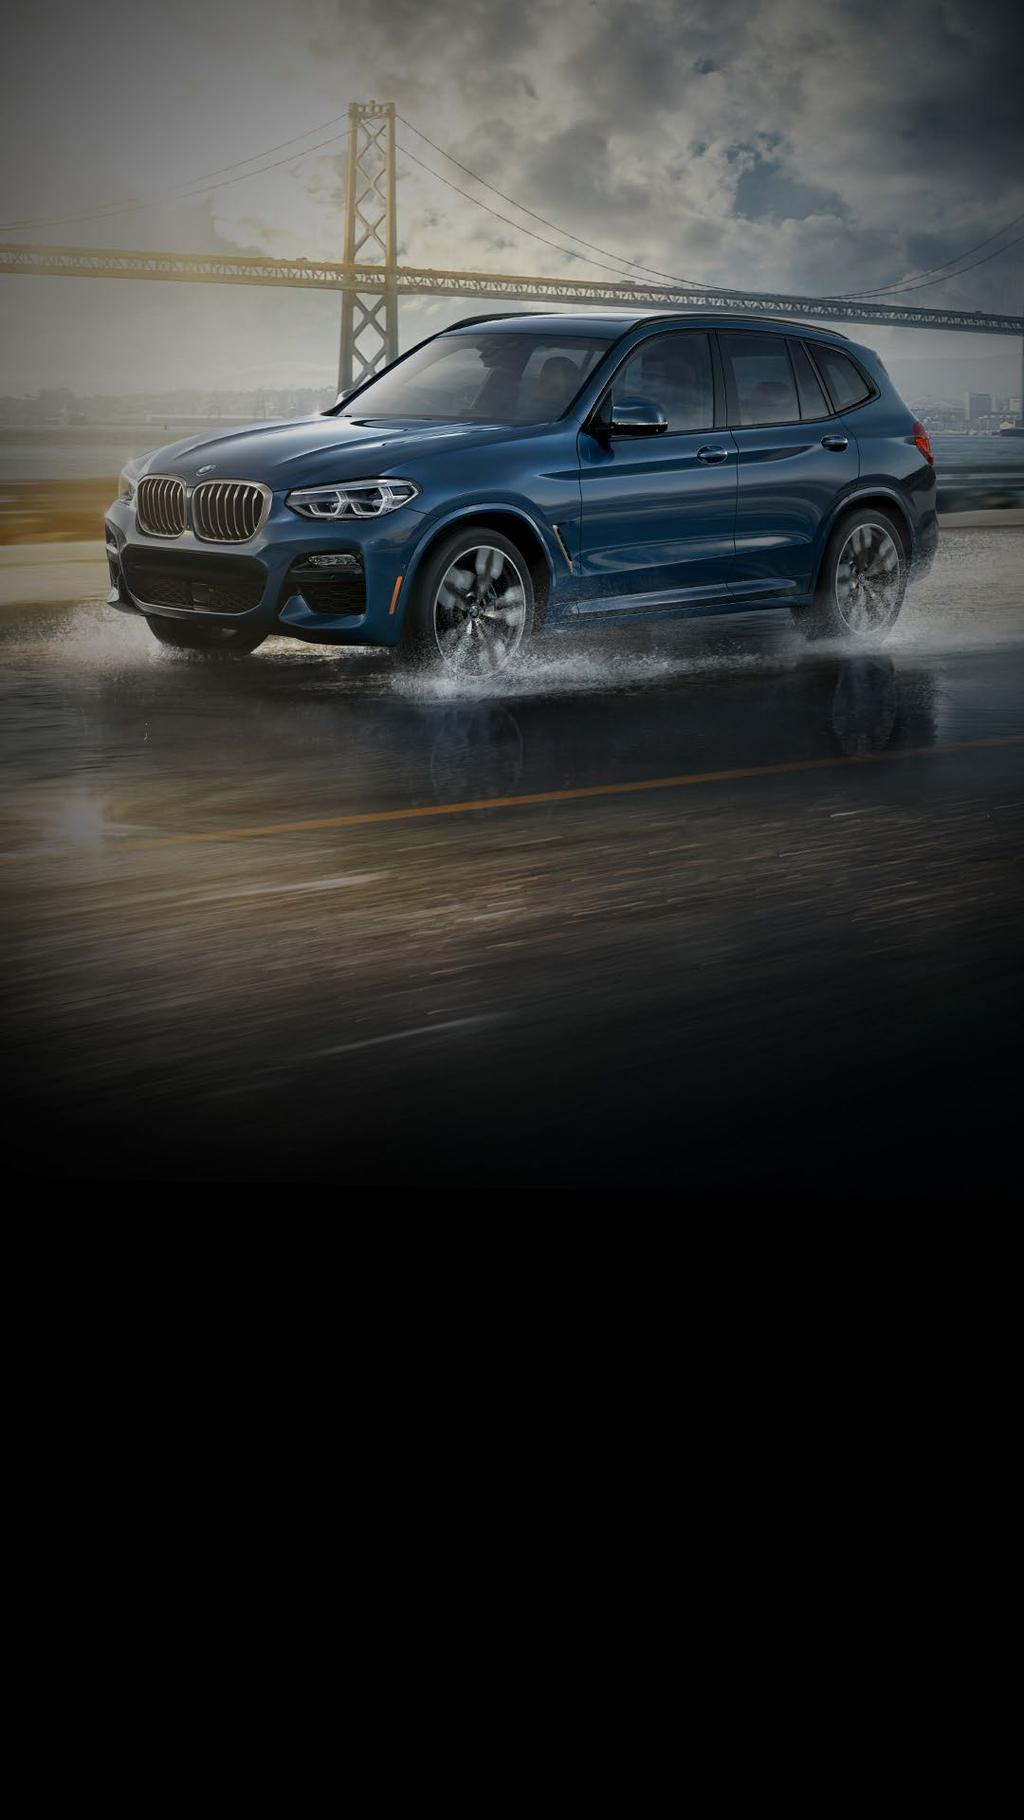 xdrive INTELLIGENT ALL-WHEEL DRIVE With xdrive, The Ultimate Driving Machine reigns supreme, no matter the road conditions.